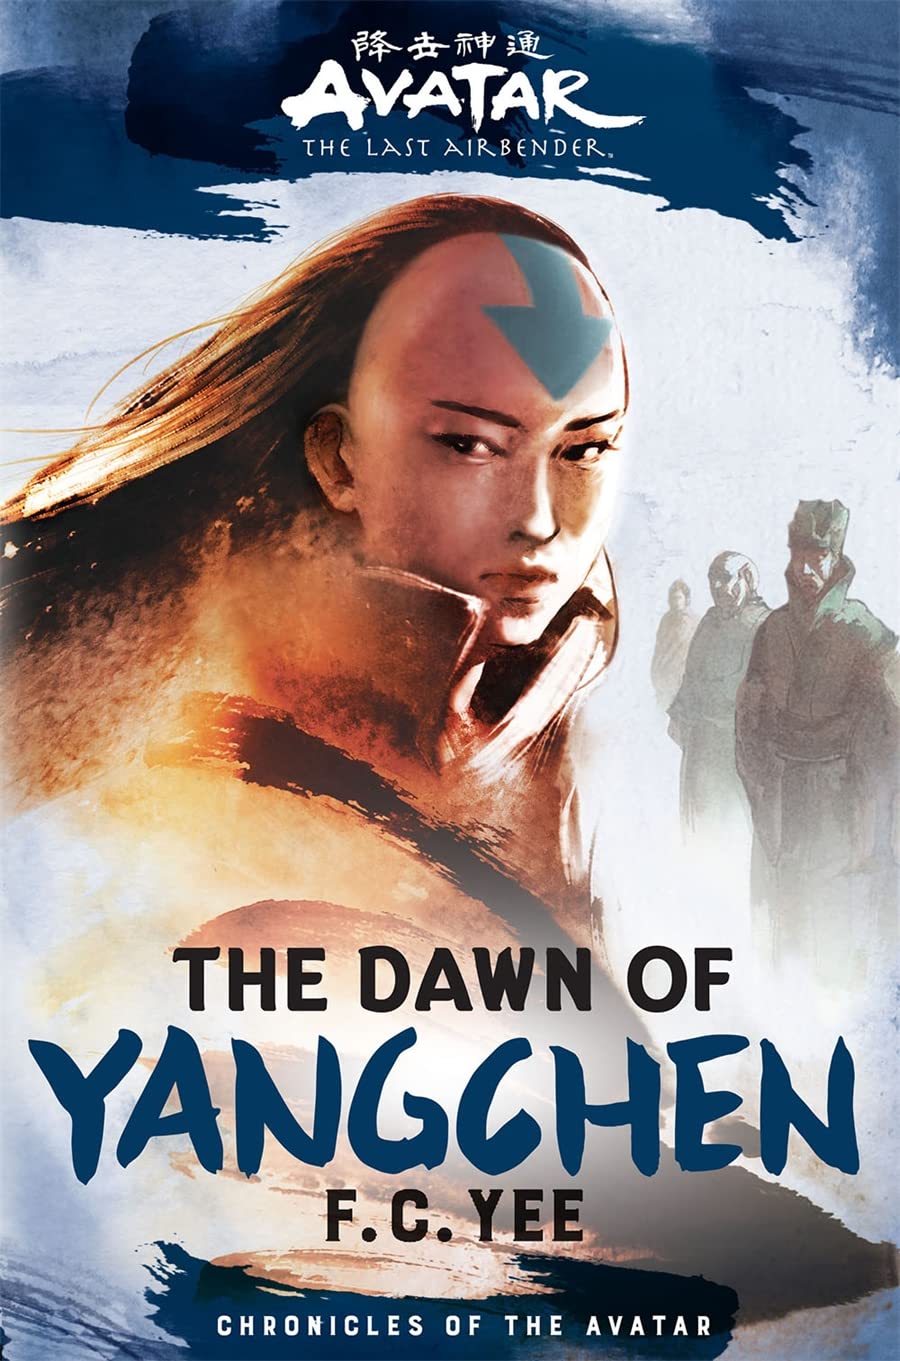 Image for "The Dawn of Yangchen"